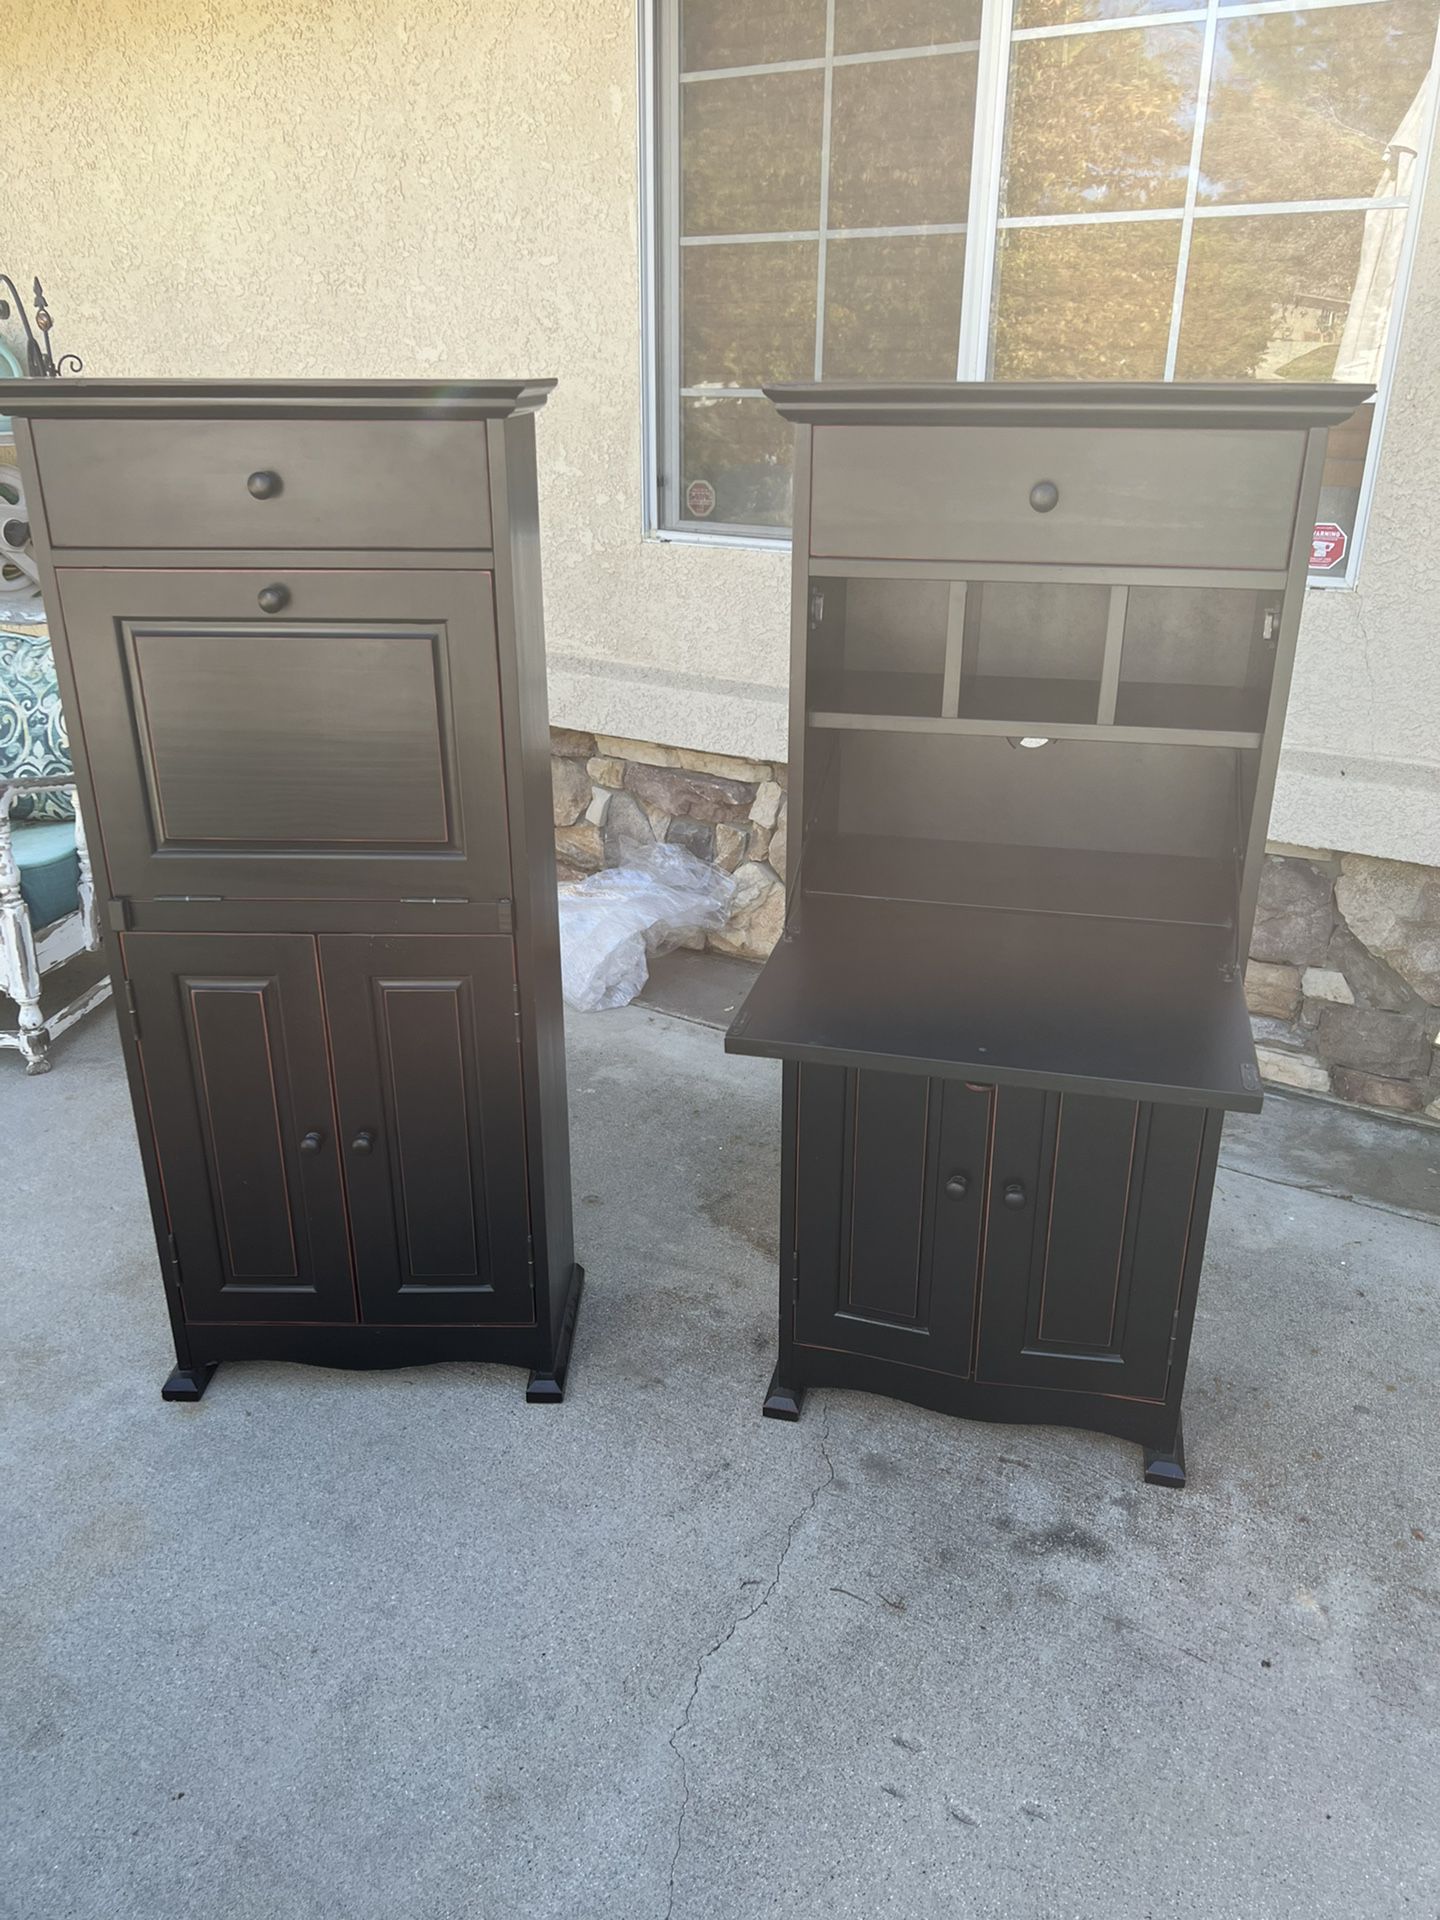 SECRETARY DESK/ACCENT CHESTS (48” Tall X 24” Wide X 10” Deep)… . $300/Set OBO